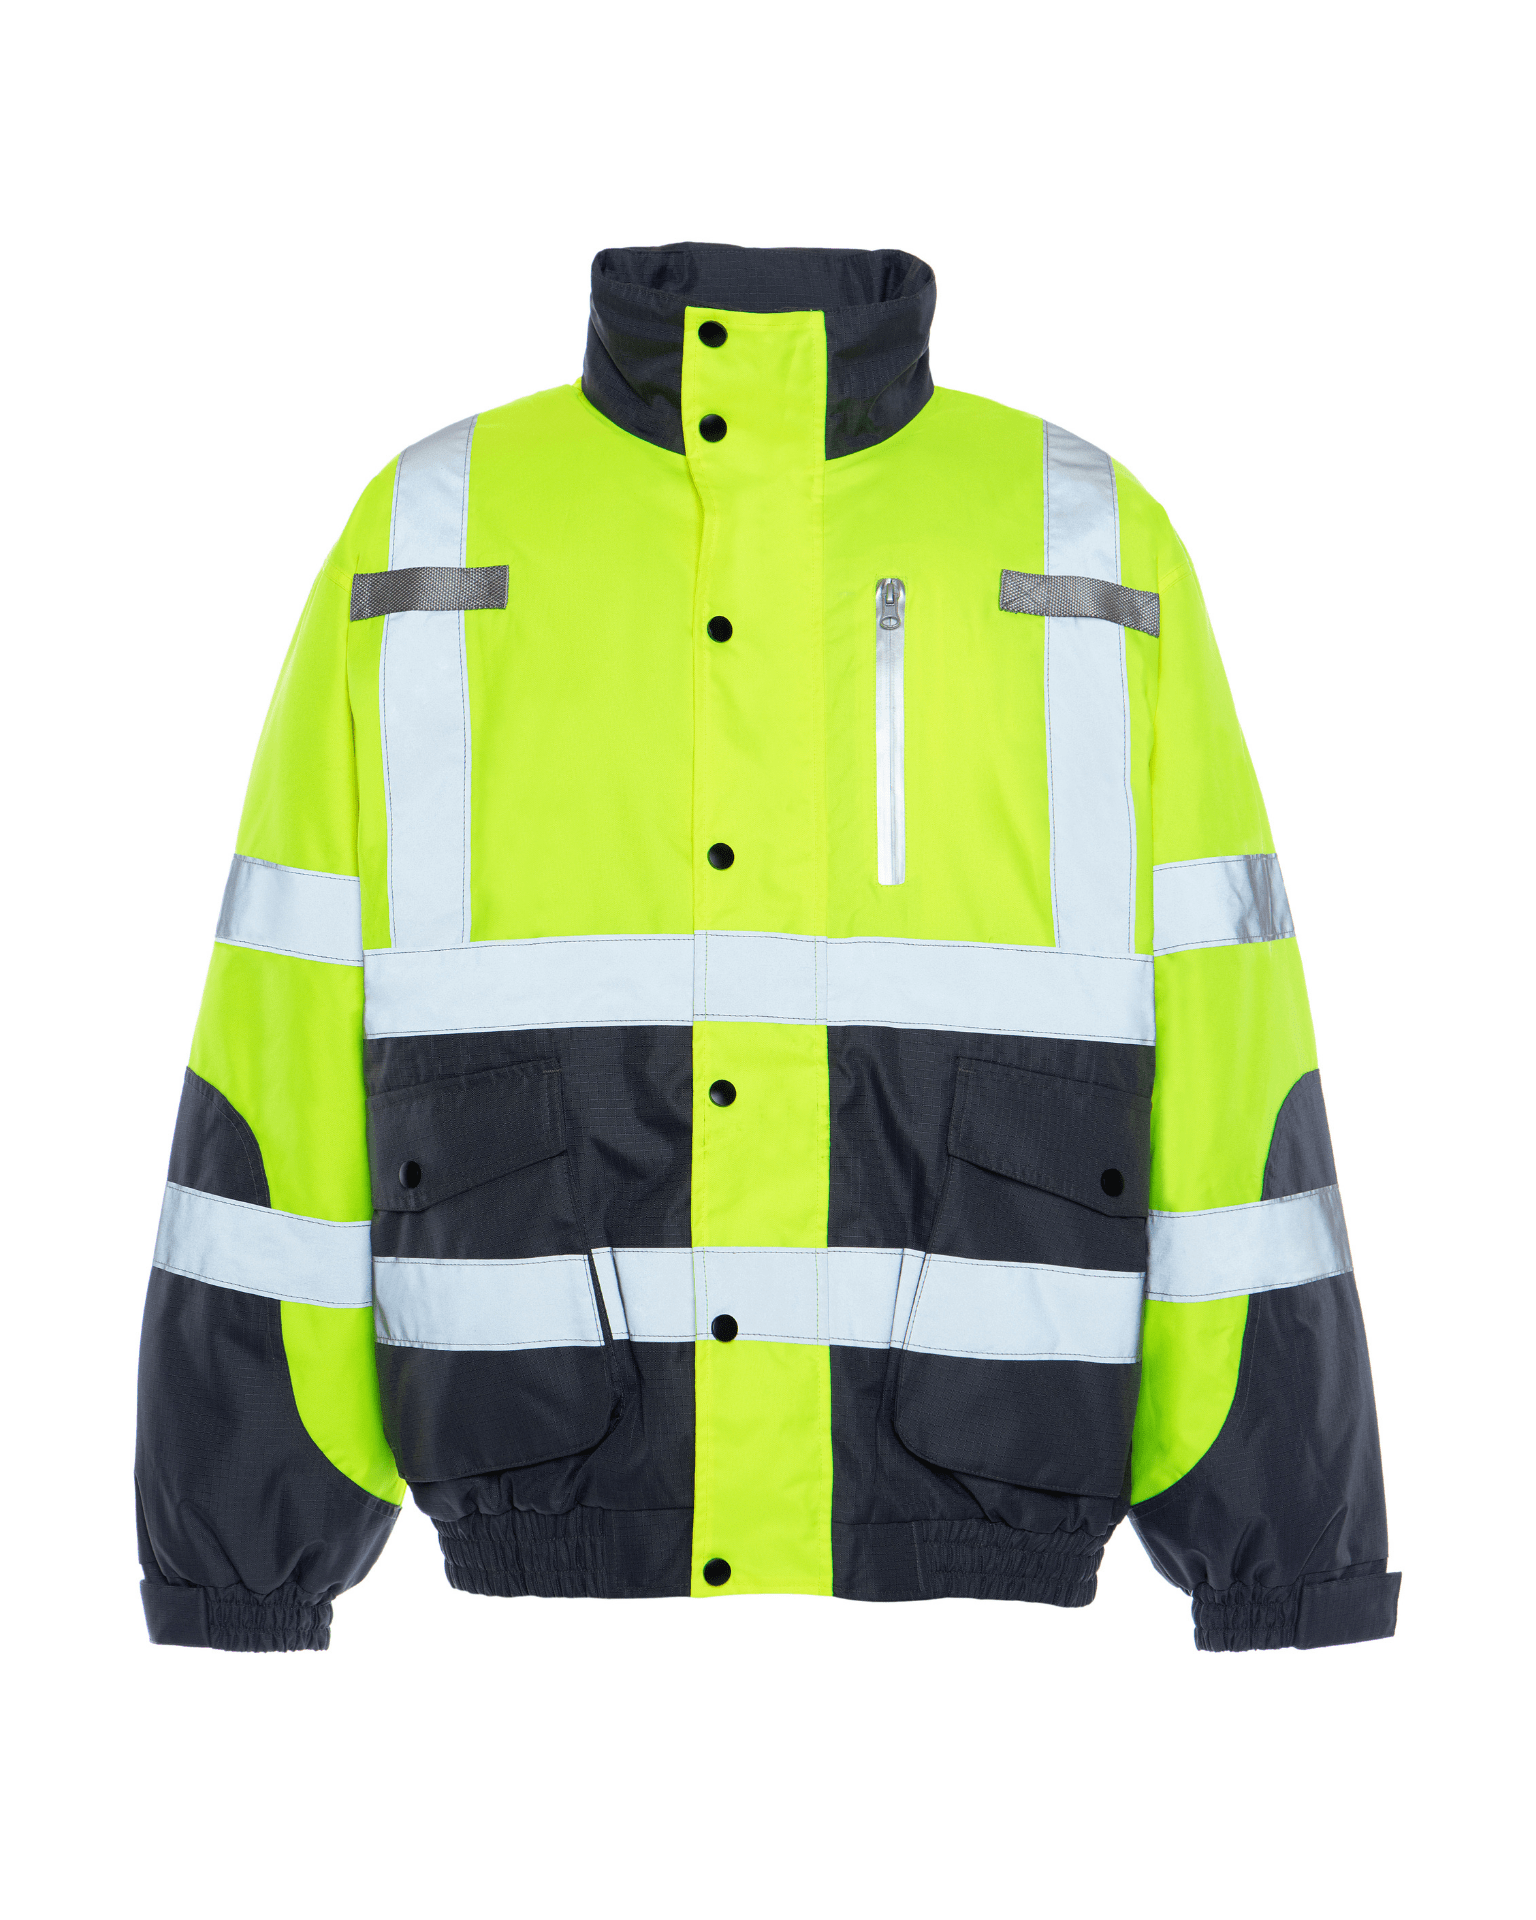 Utility Pro Wear Jacket UHV887 HiVis Warm UP 3-in-1 Jacket with Removable Lining